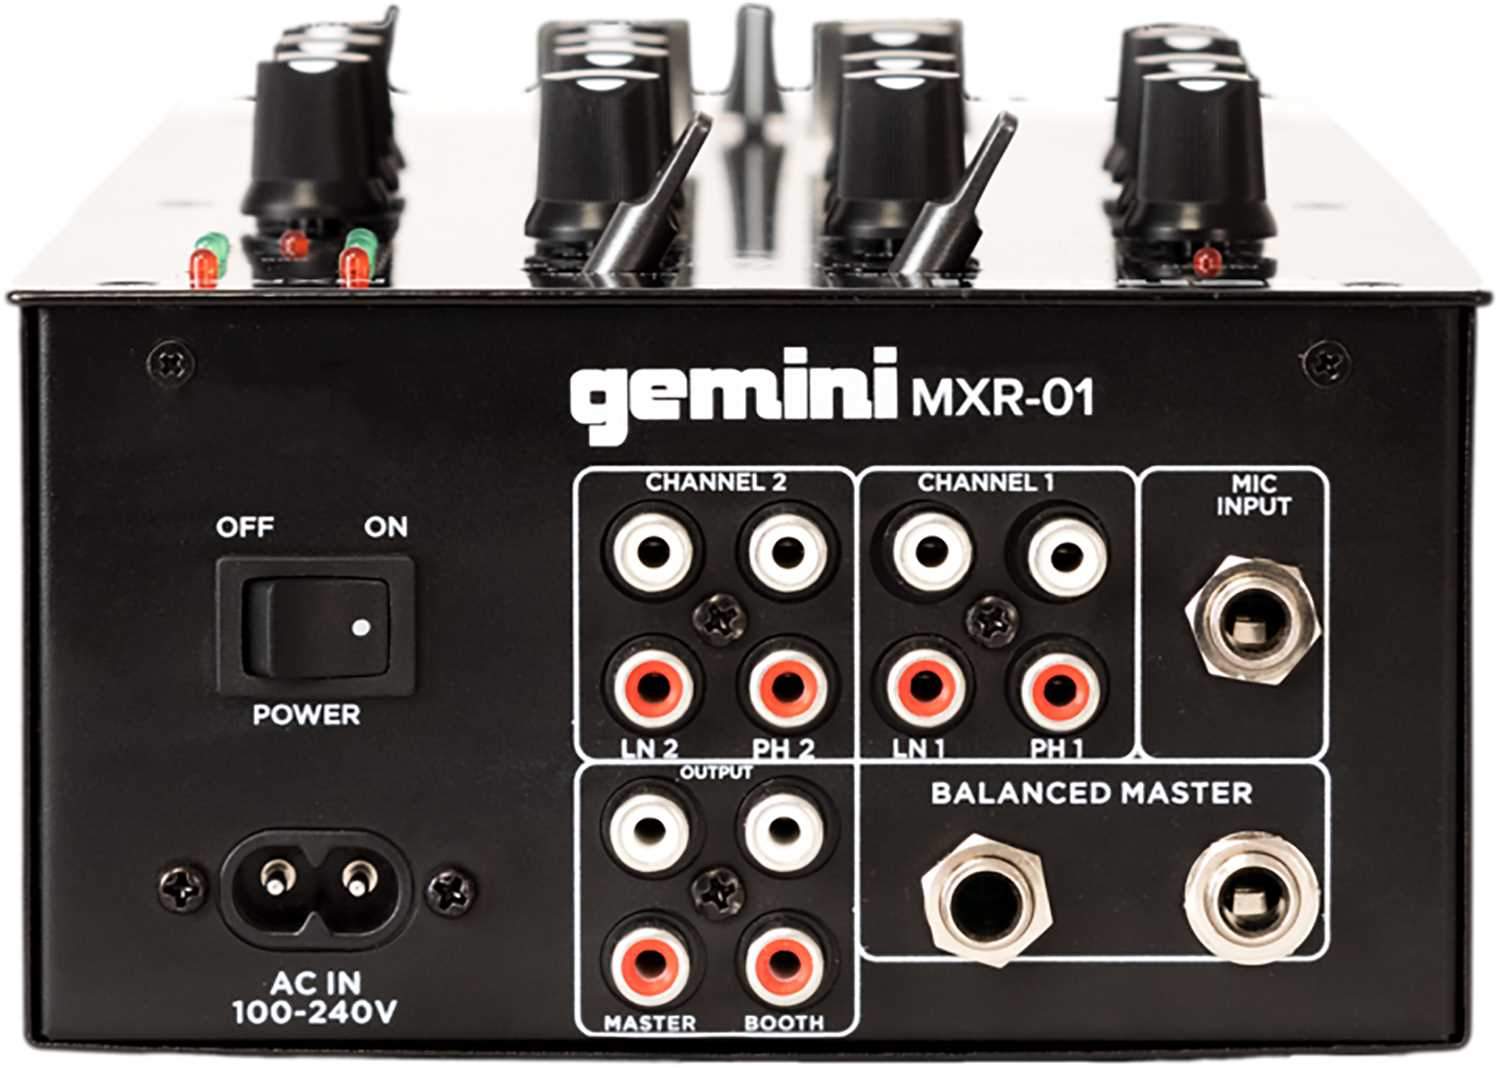 Gemini MDJ-500 Media Player Pair with 2-Channel Mixer - PSSL ProSound and Stage Lighting